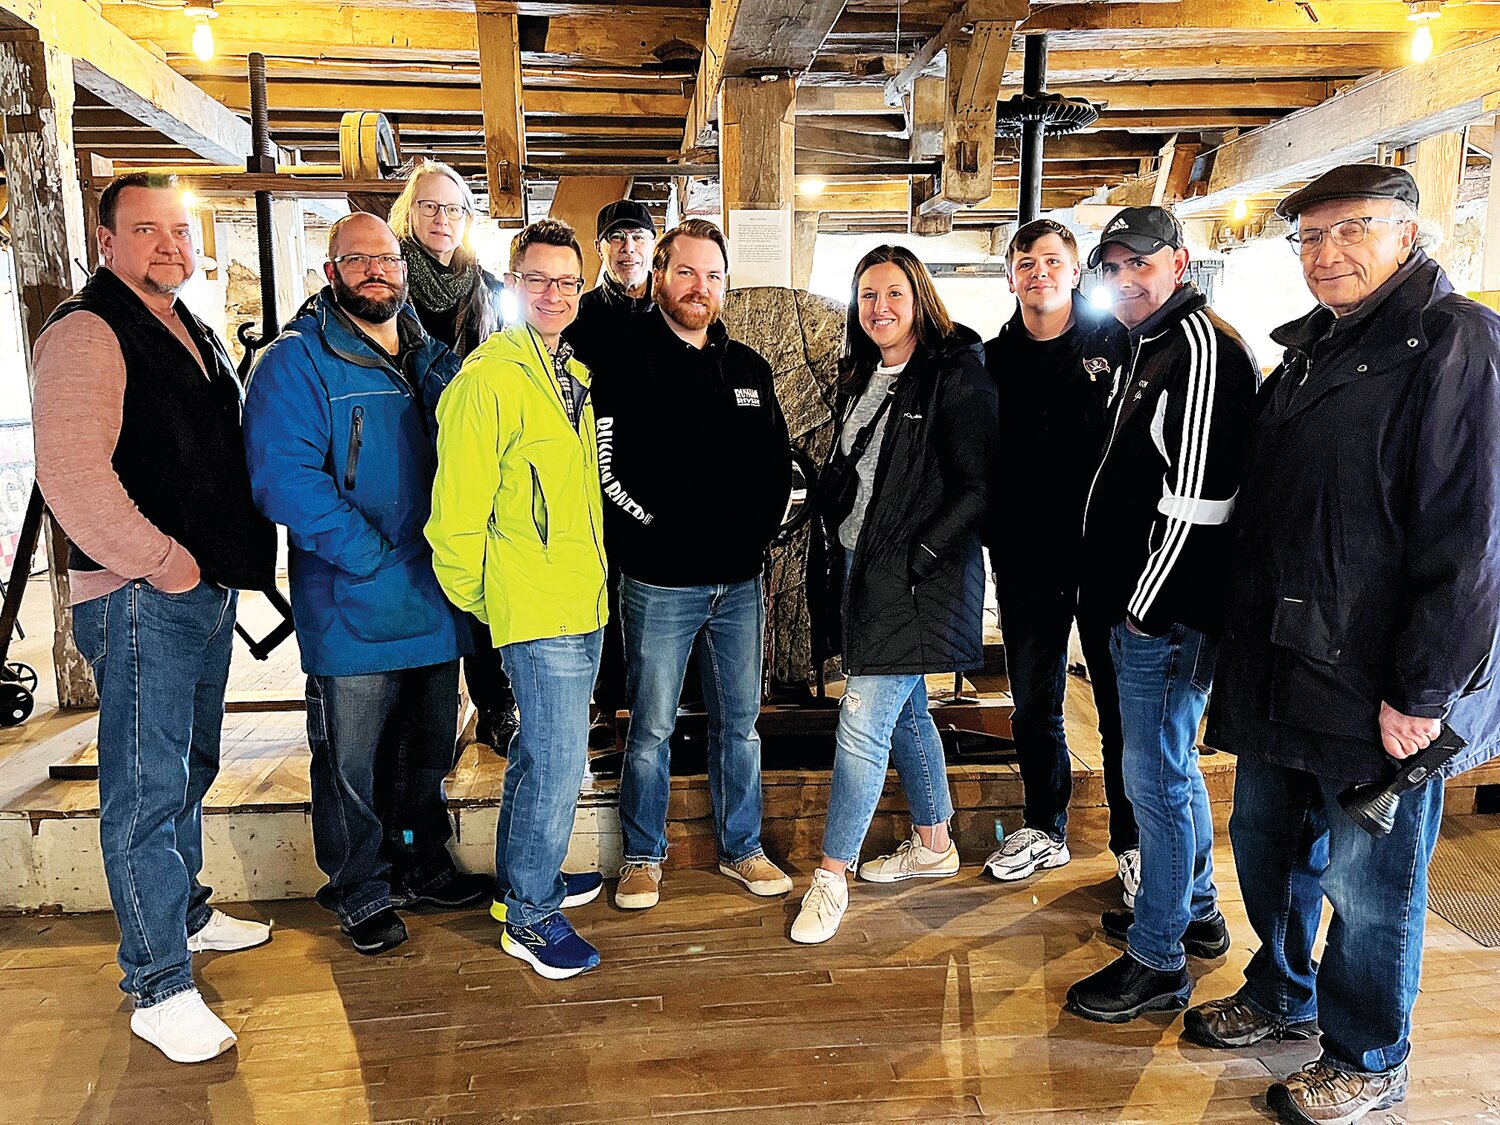 Palisades High School and Middle School social studies teachers pose with members of the Durham Historical Society during a tour of the Durham Grist Mill. The educators are incorporating more local history in the schools’ curriculum.